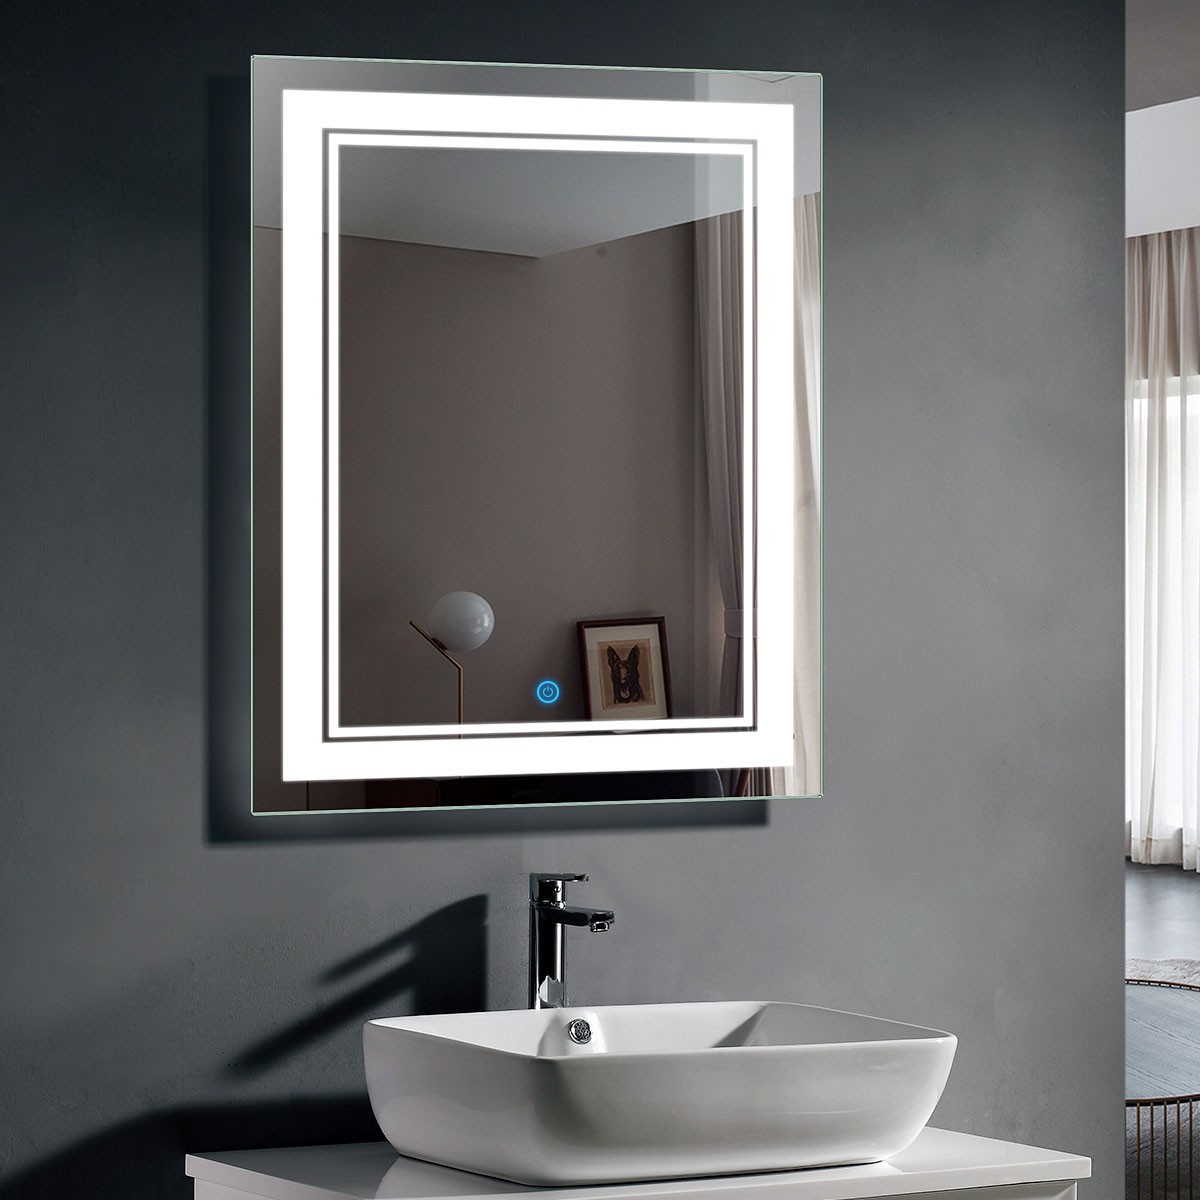 DECORAPORT 28 x 36 In LED Bathroom Mirror with Touch Button, Dimmable, Vertical & Horizontal Mount (CK160-2836)